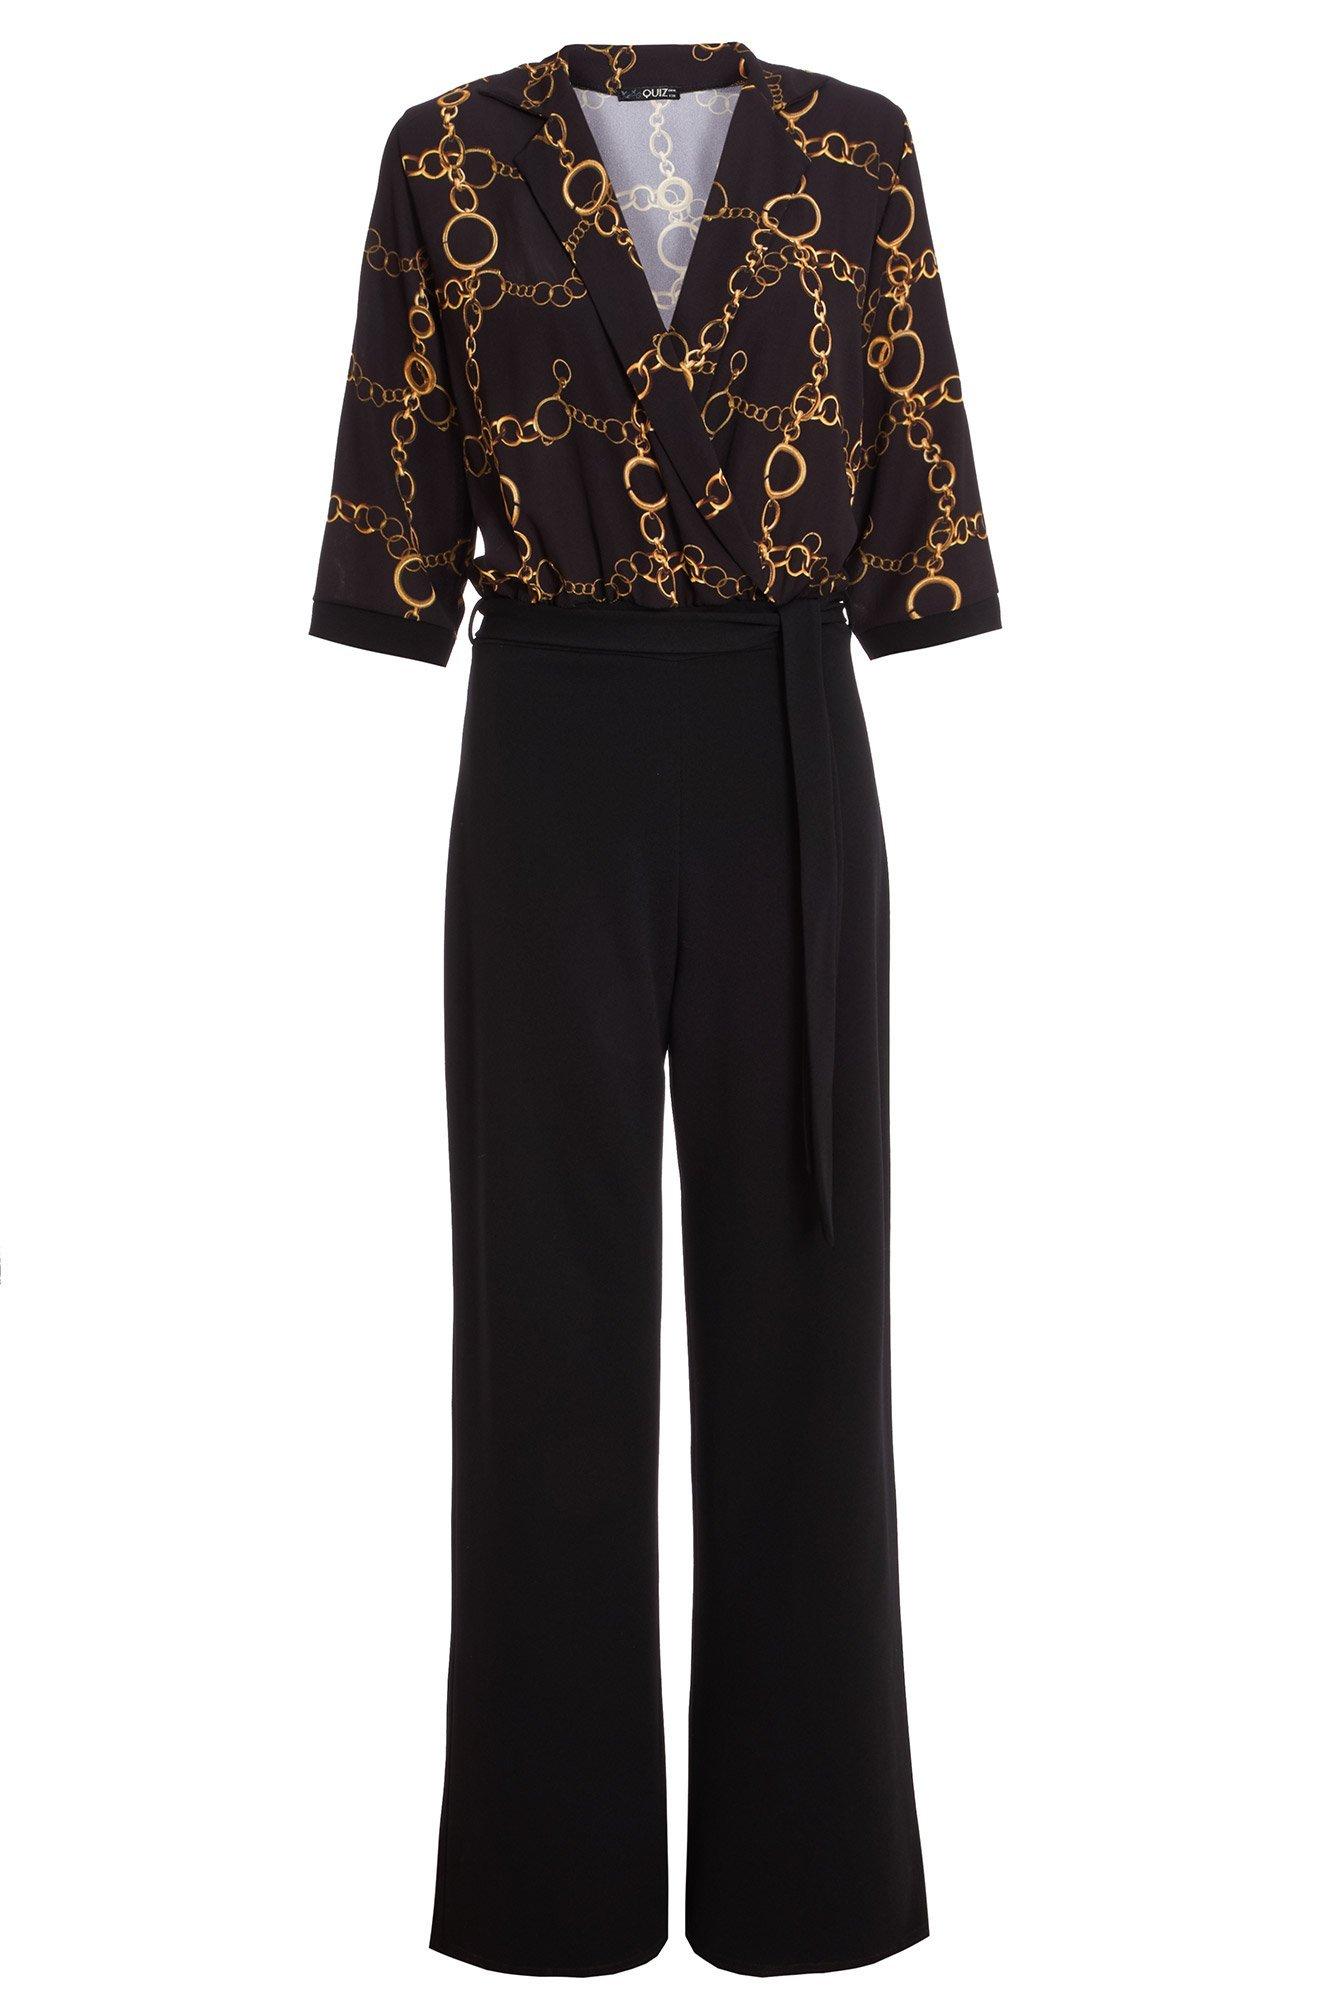 Black and Gold Chain Print Jumpsuit - Quiz Clothing